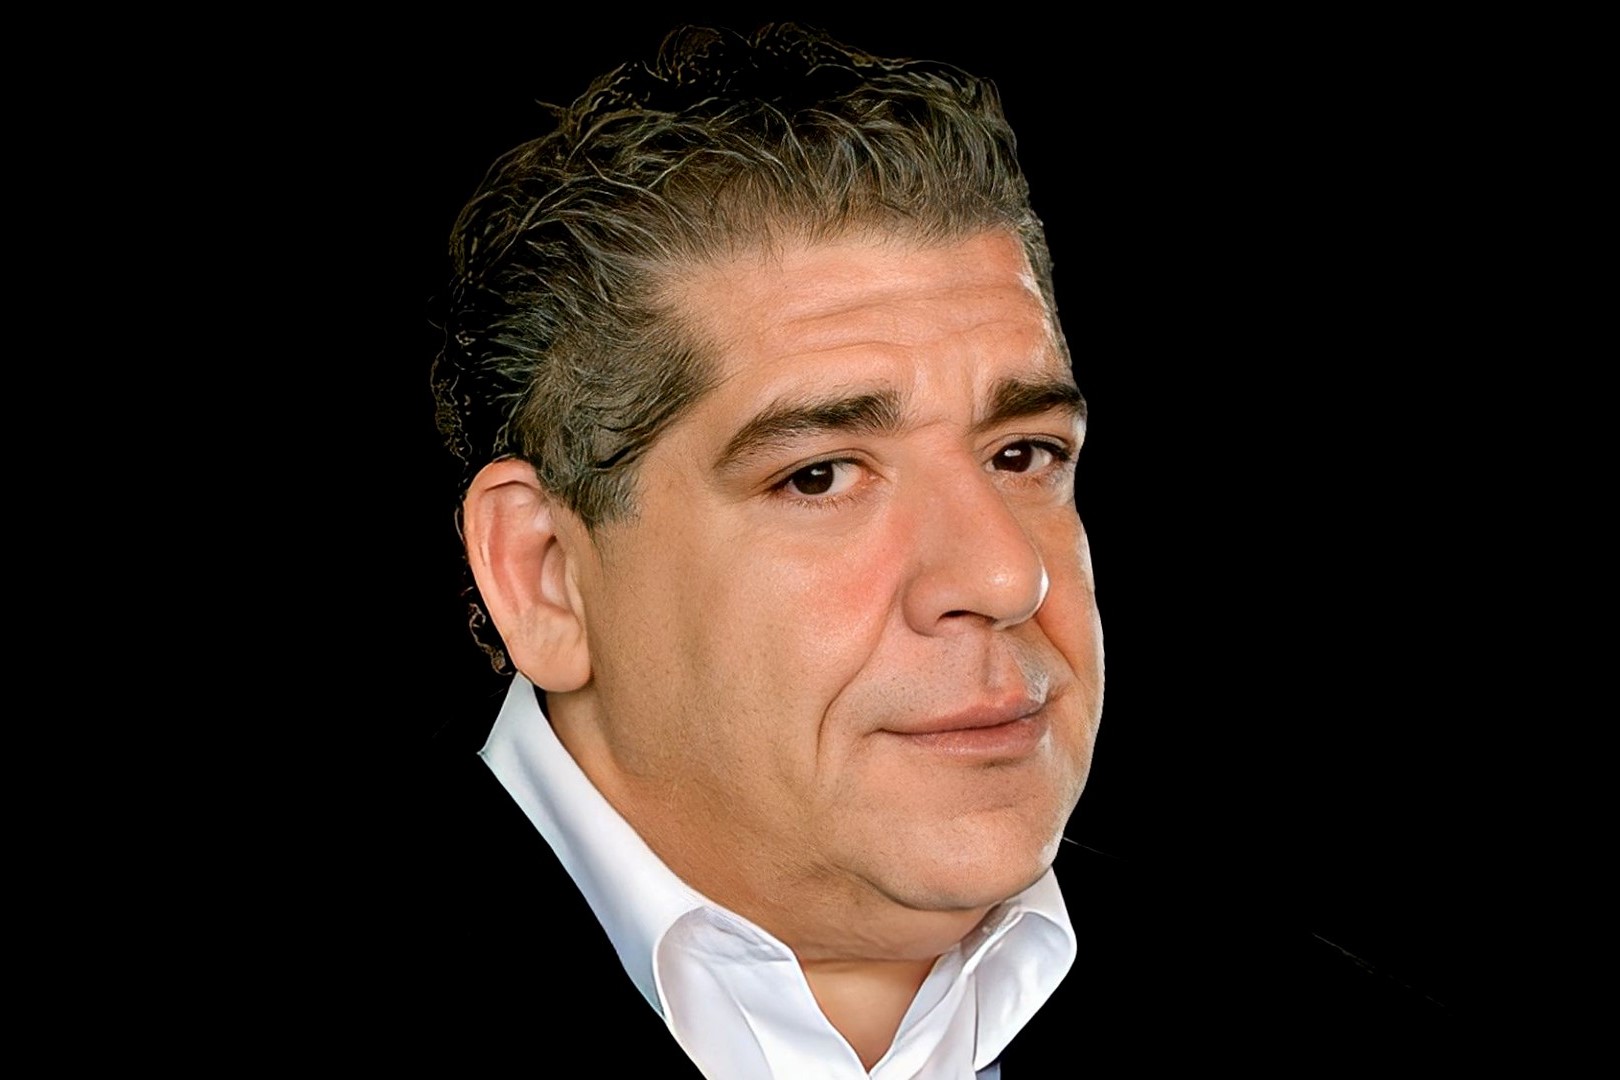 Joey Diaz's Mind-Blowing Earnings Revealed! You Won't Believe How Much He Makes!